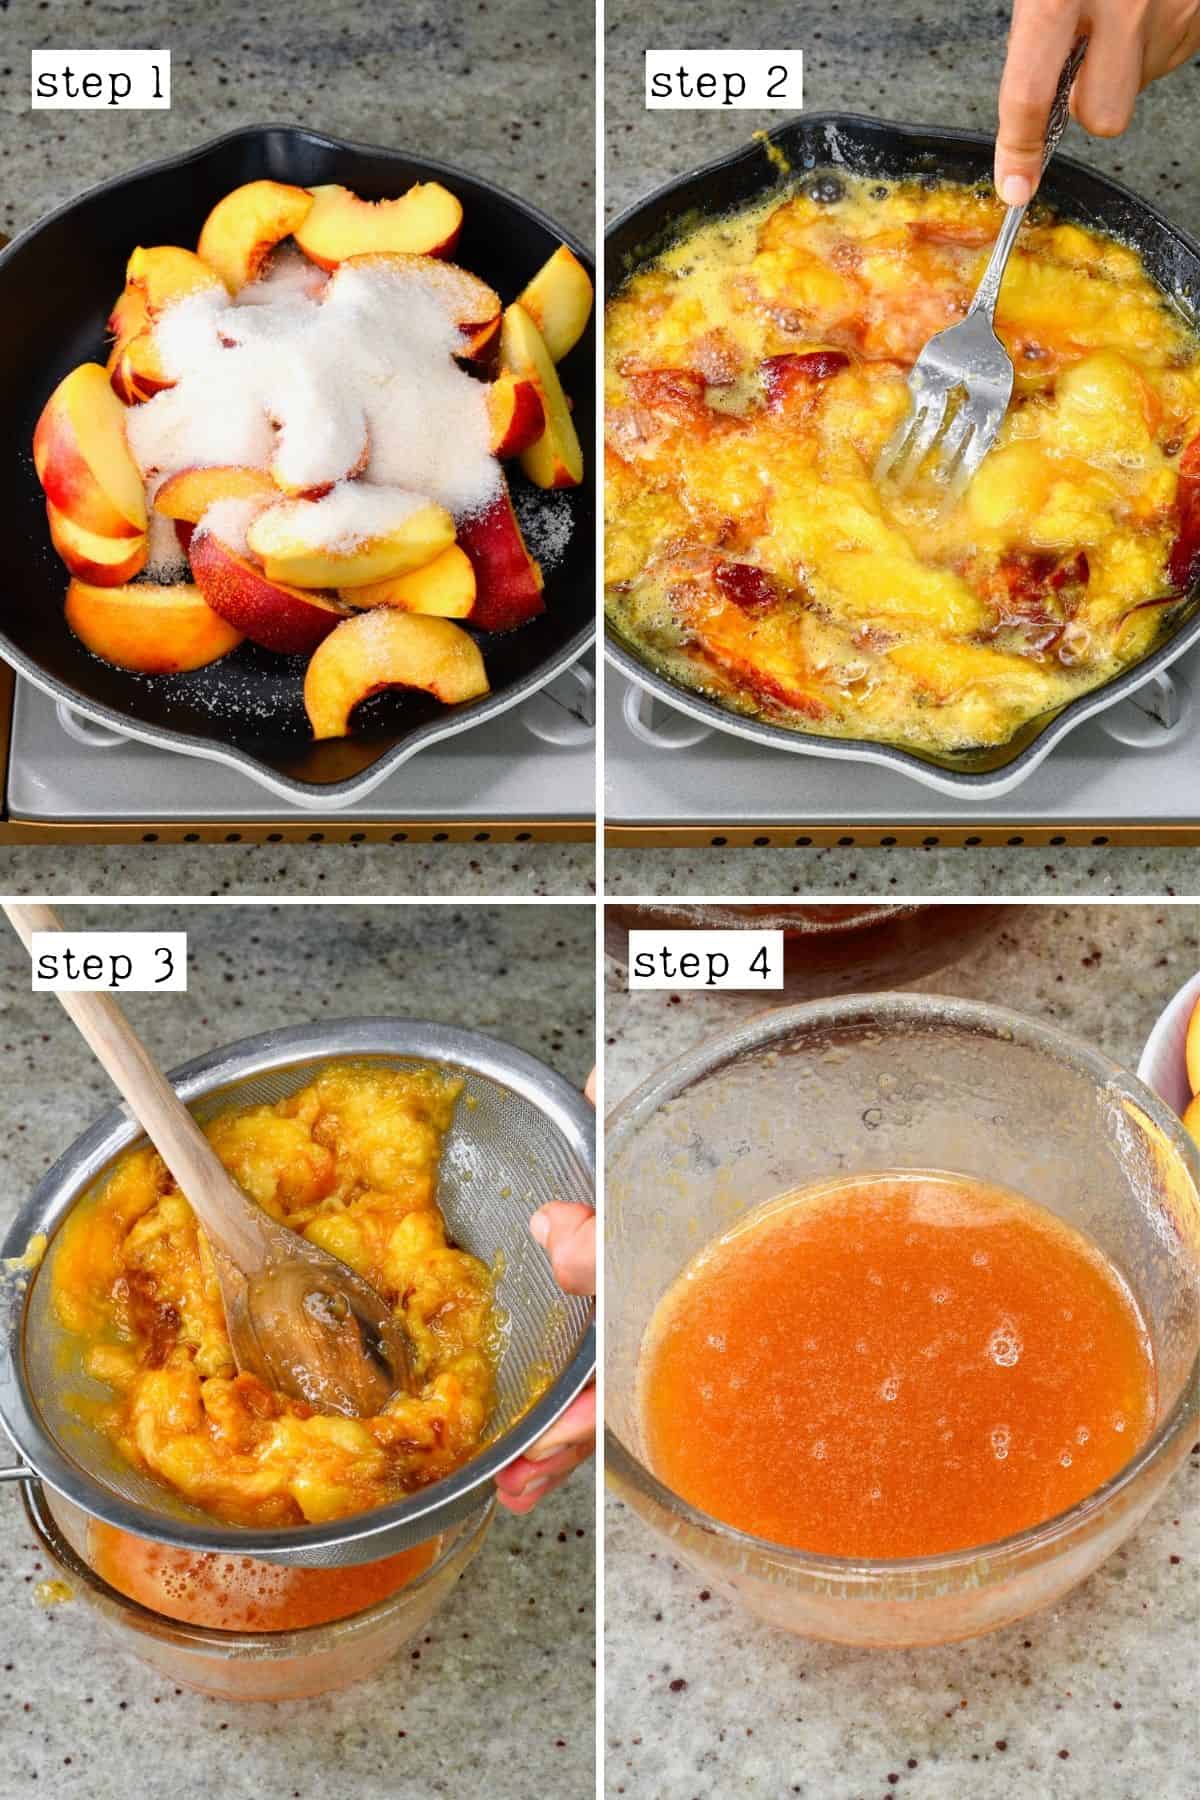 Steps for making peach syrup by mashing the peaches